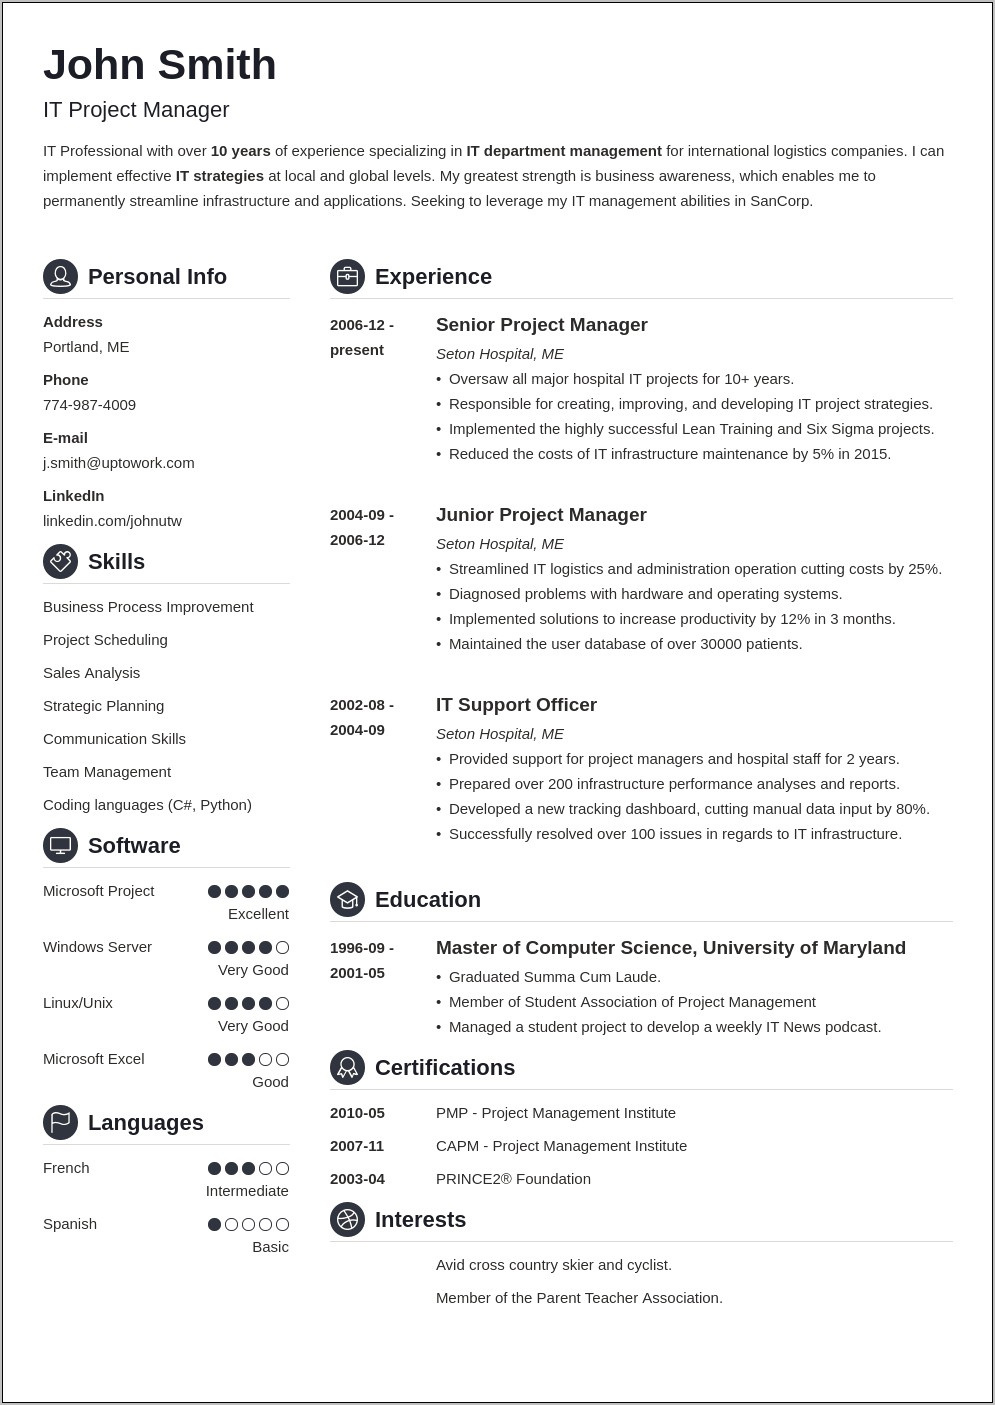 blank-resume-templates-for-free-to-fill-in-resume-example-gallery